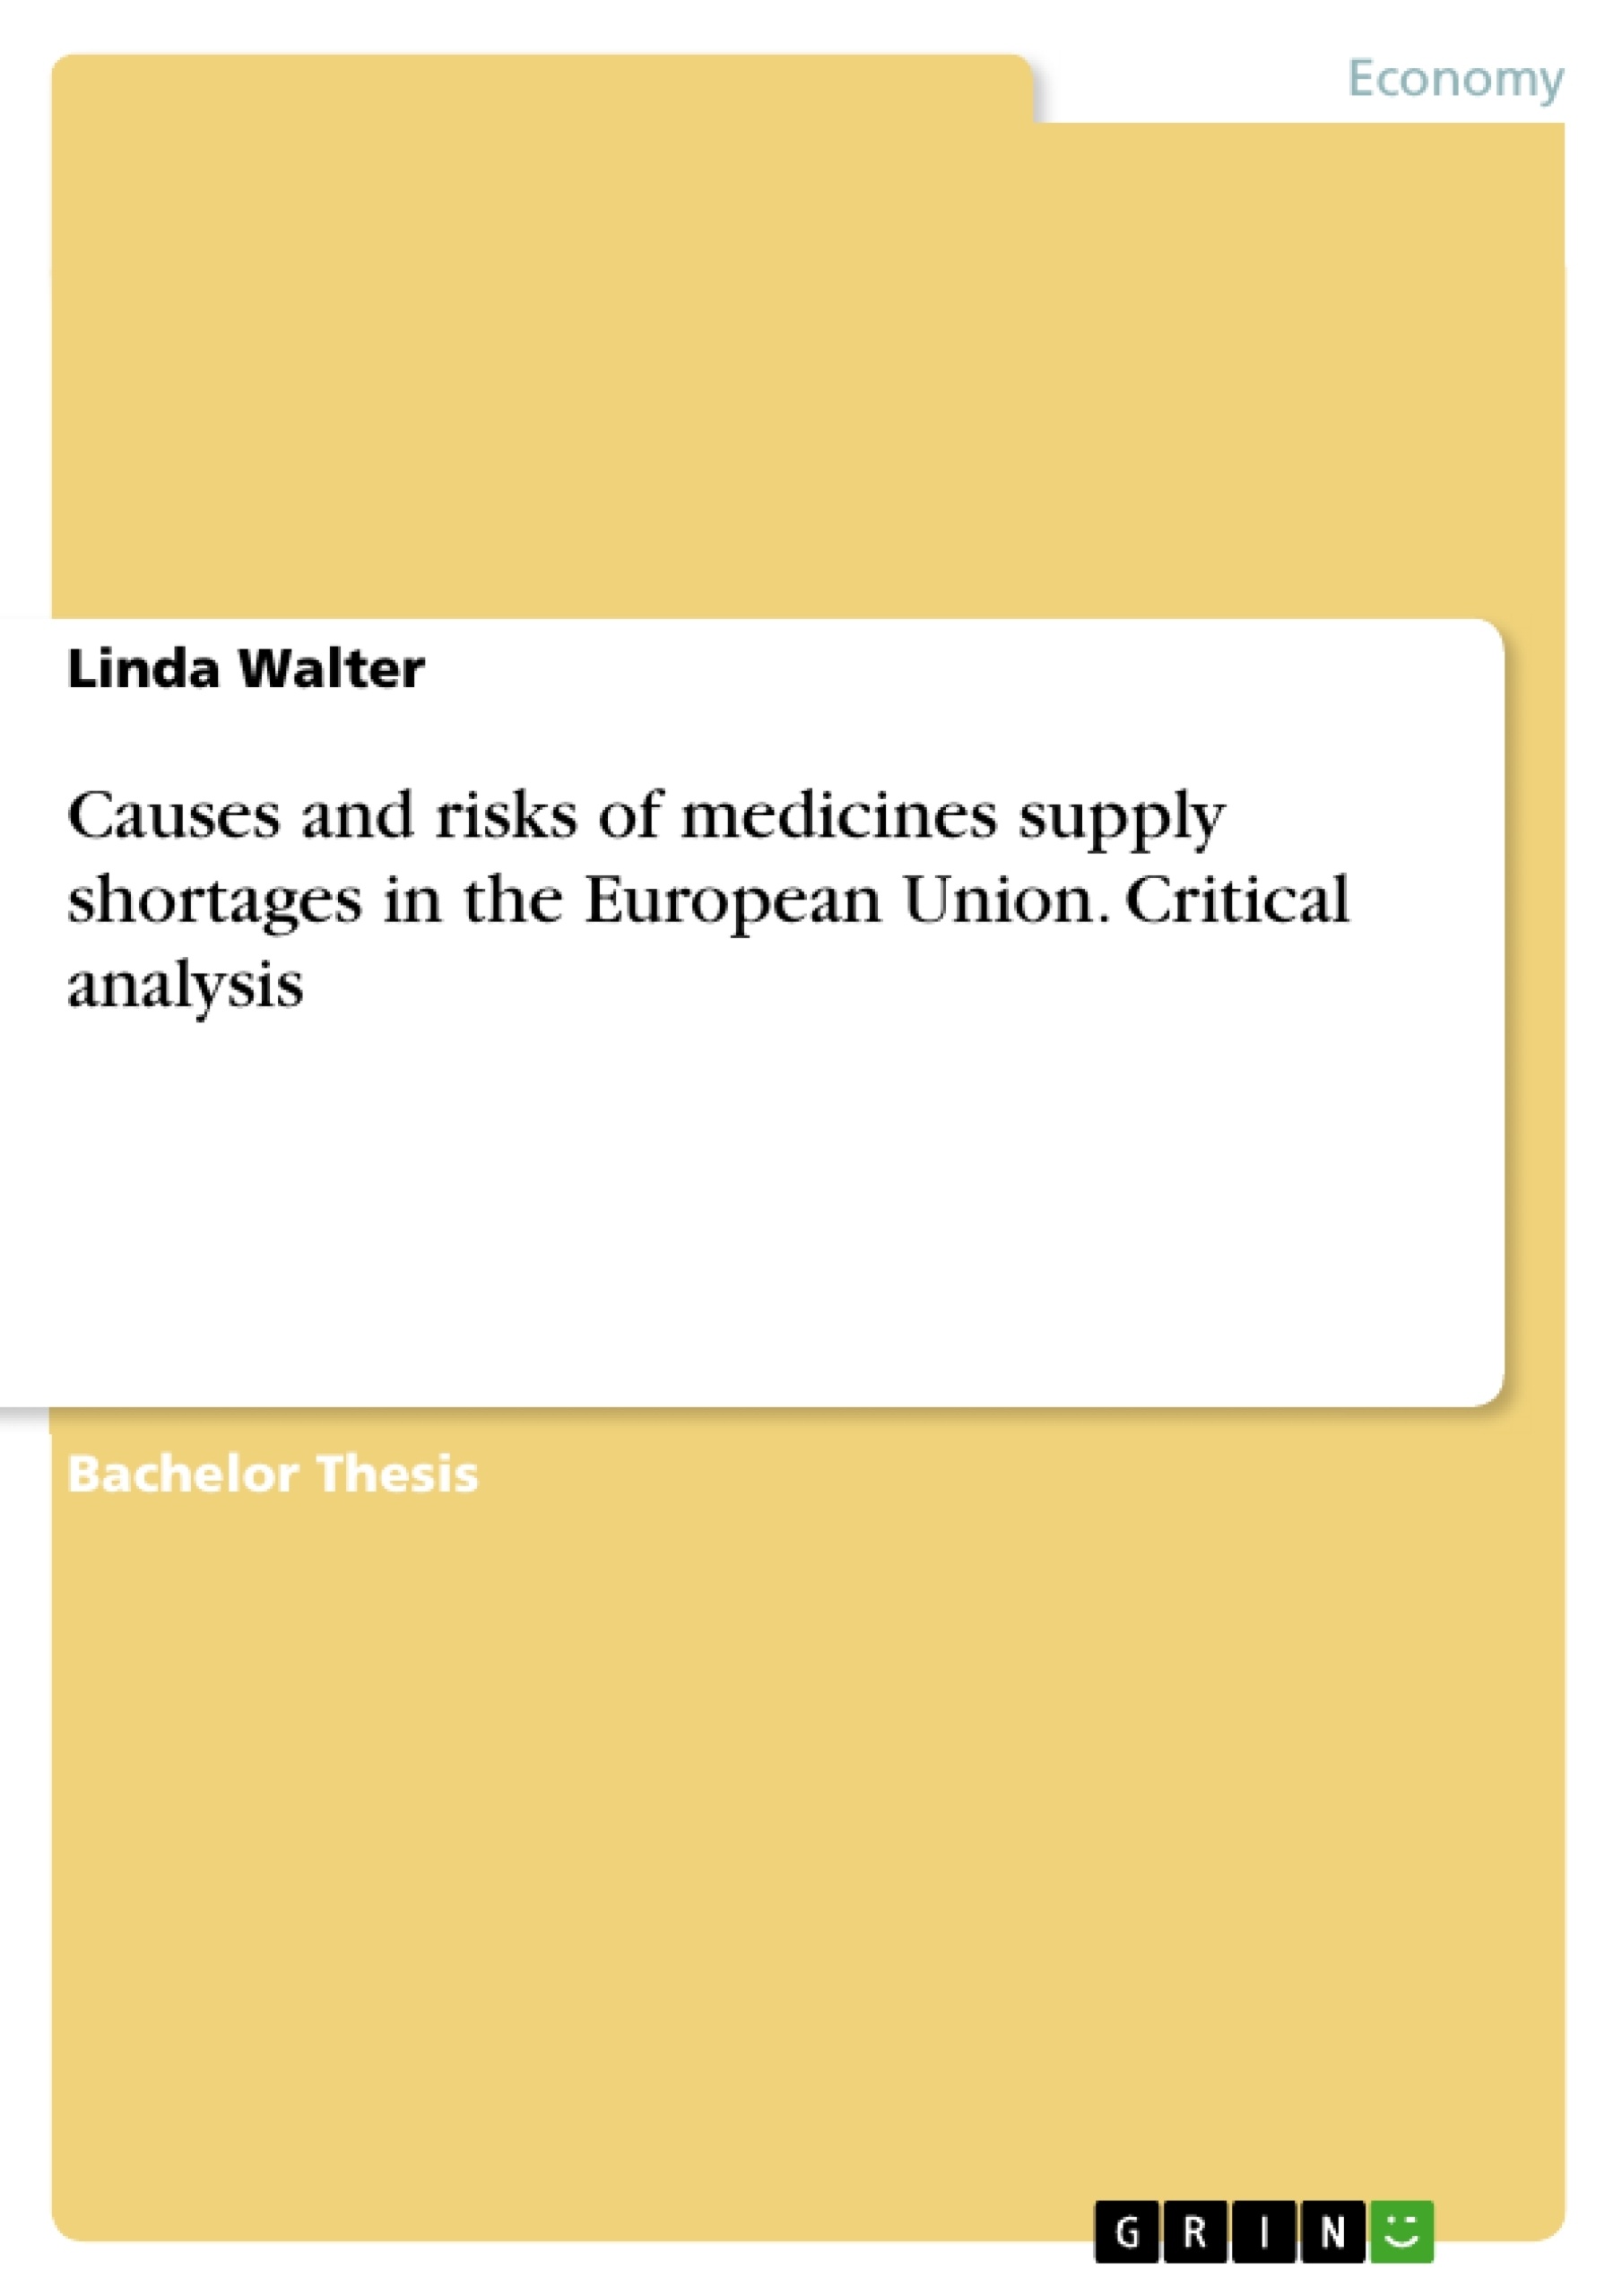 Title: Causes and risks of medicines supply shortages in the European Union. Critical analysis